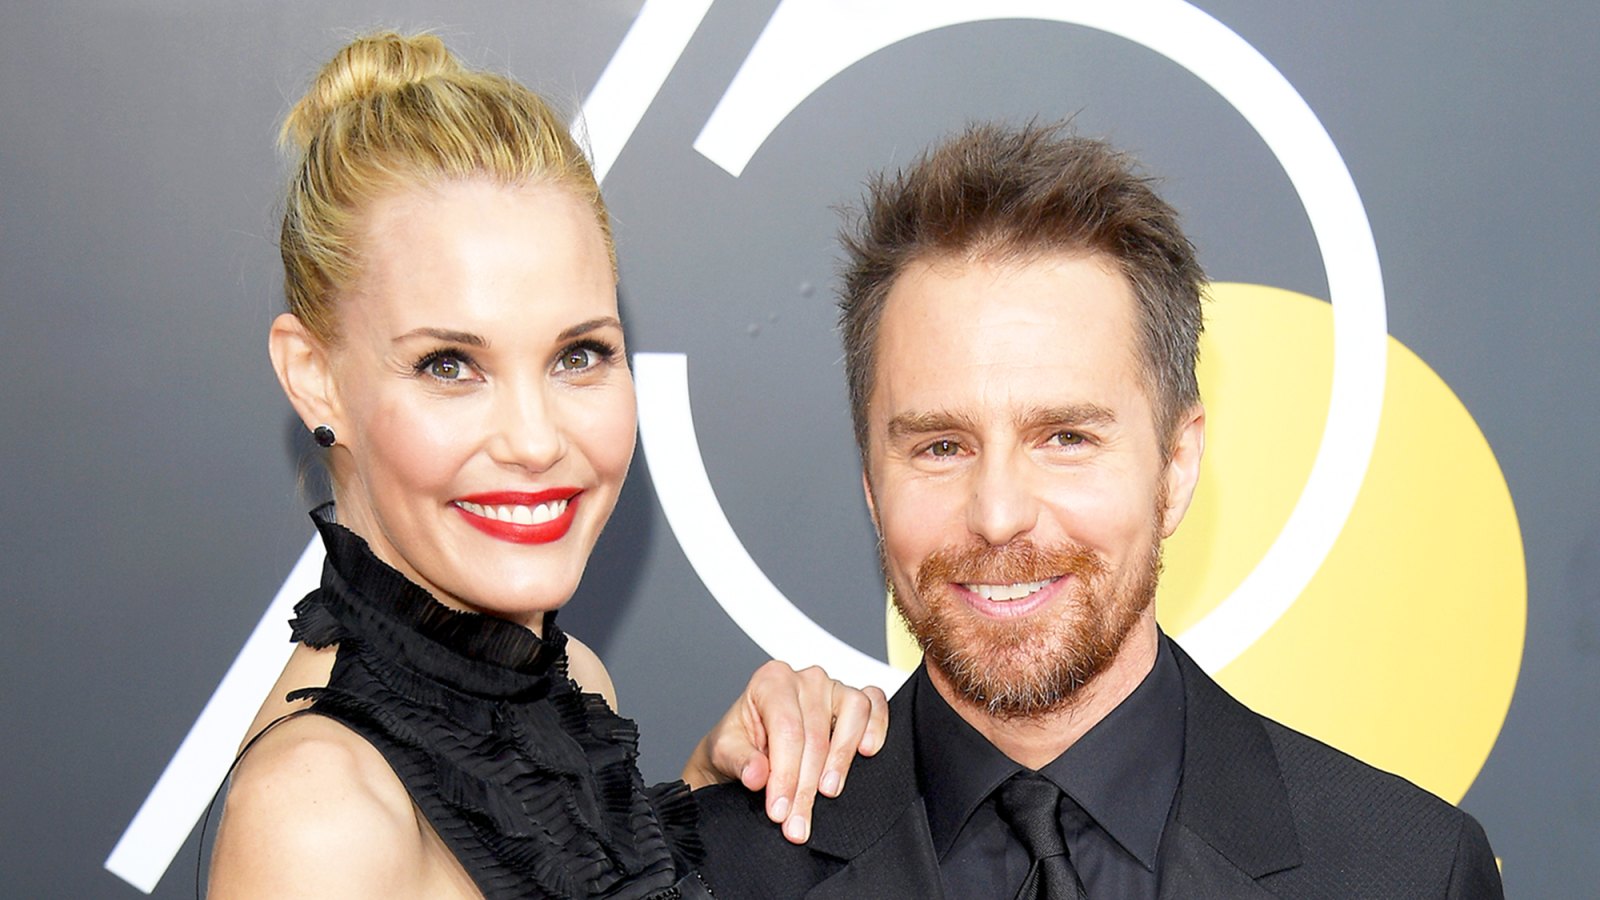 Leslie Bibb and Sam Rockwell attend the 75th annual Golden Globe Awards at The Beverly Hilton in Beverly Hills.